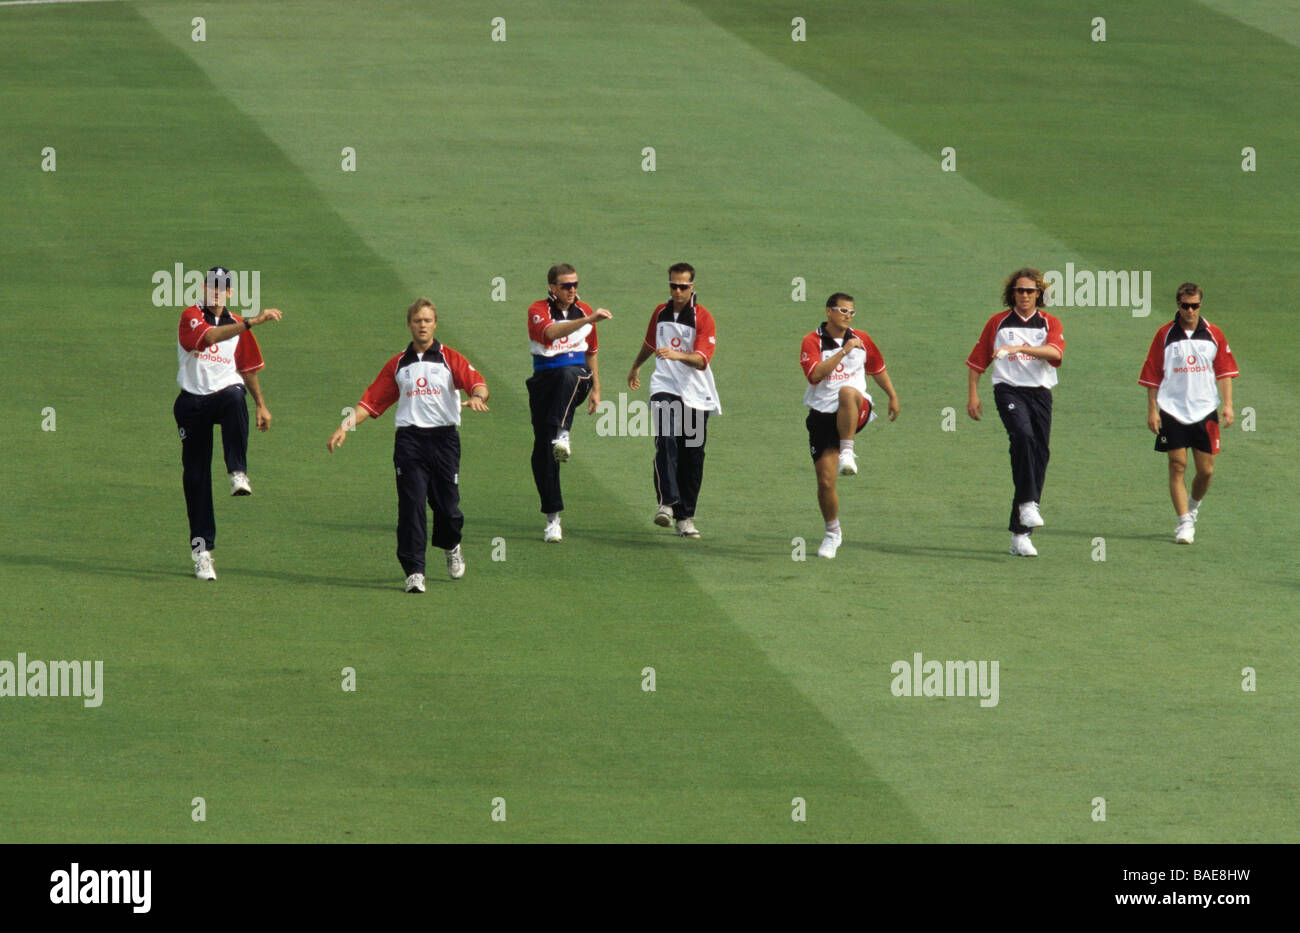 England cricket team doing warming up exercises like a tribal dance on the cricket pitch at Lords before a match with Pakistan Stock Photo